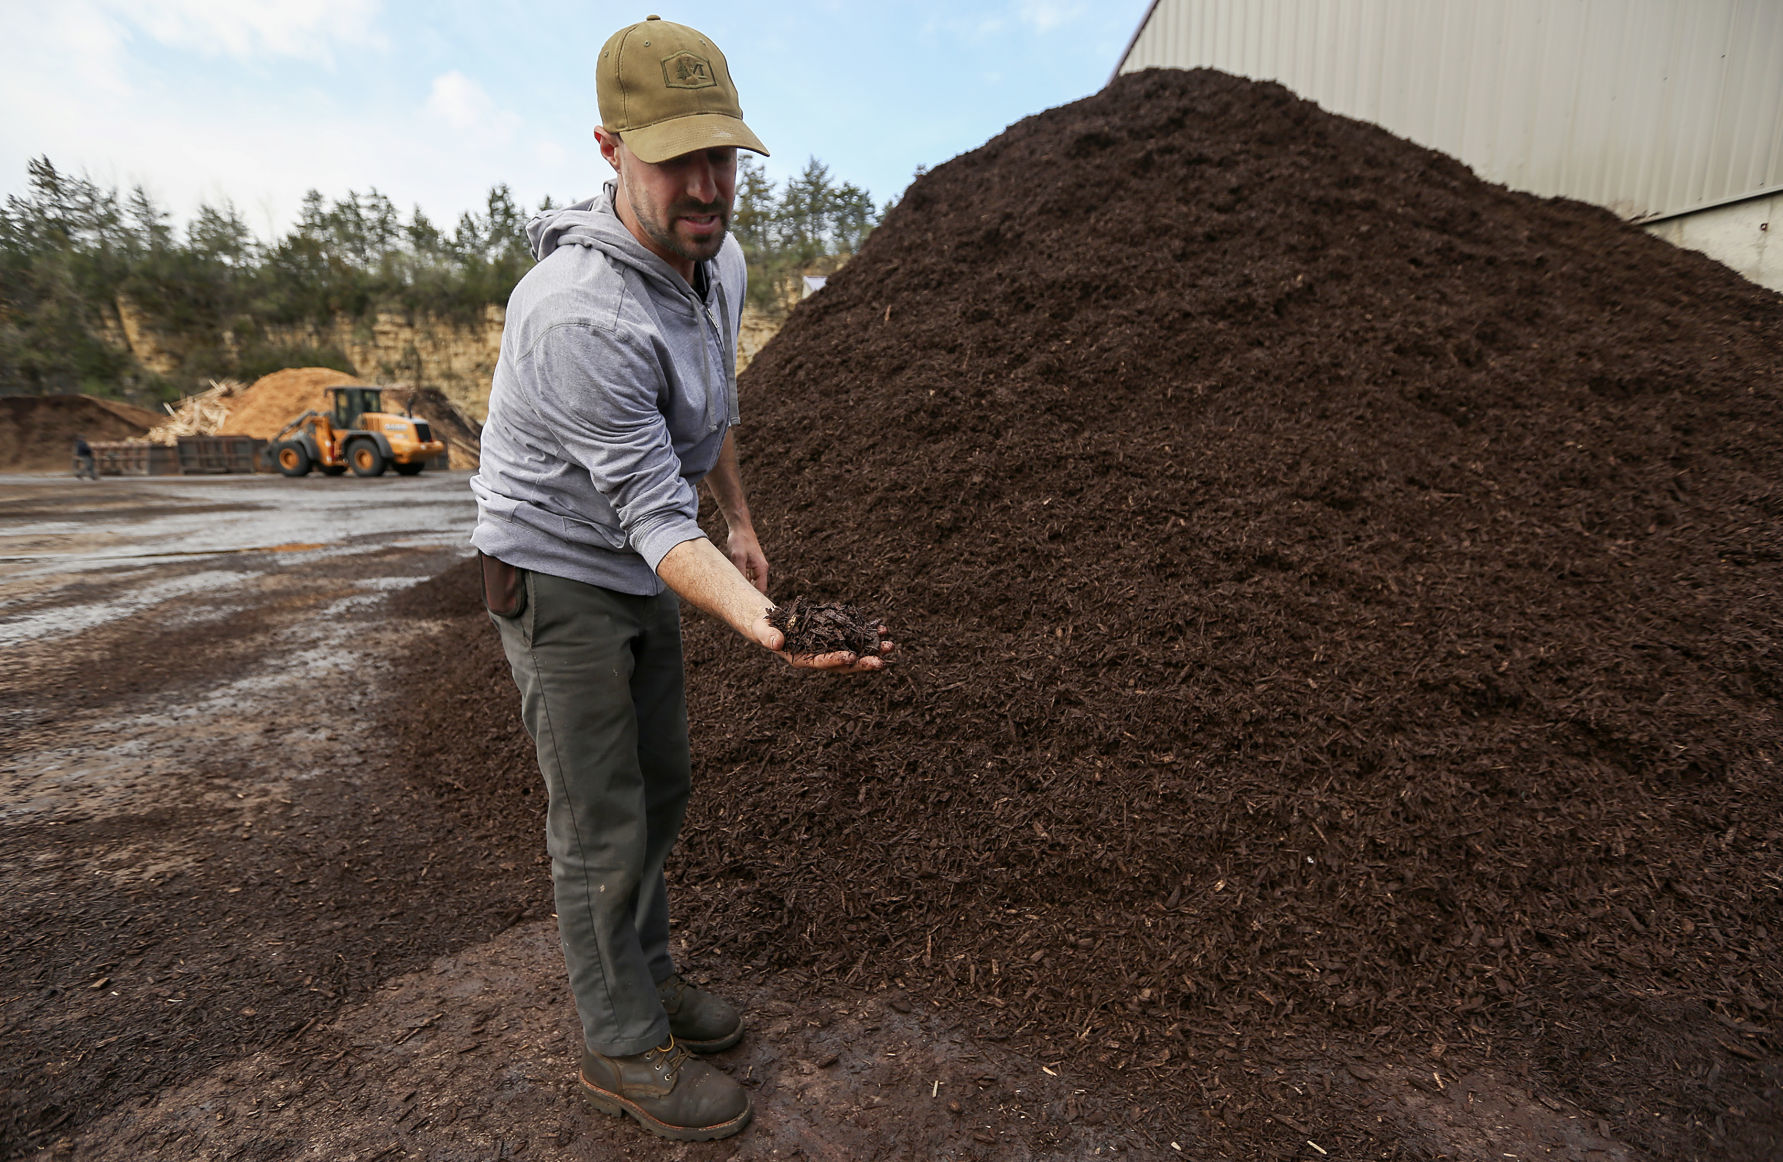 Operations manager Tom Miller shows colored mulch at Dubuque Mulch Company in Dubuque on Friday, May 4, 2018.    PHOTO CREDIT: NICKI KOHL